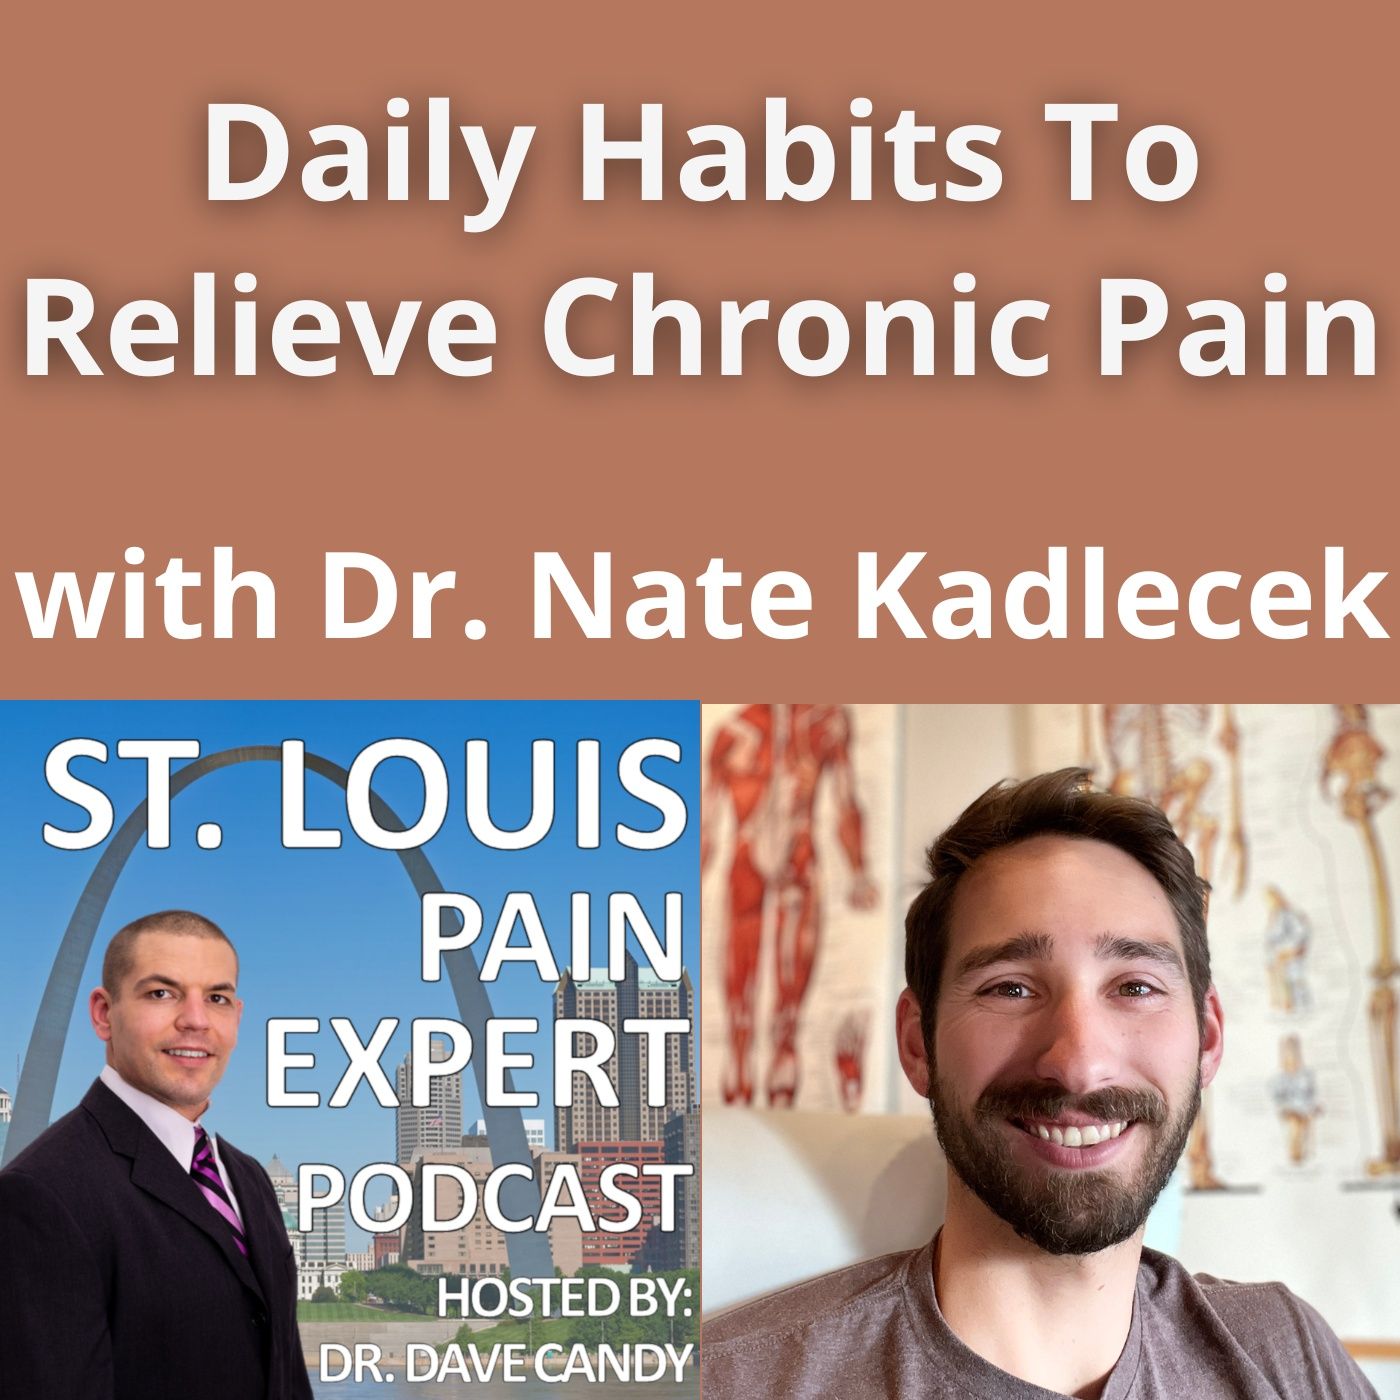 Daily Habits To Relieve Chronic Pain: The Daily Exercise Routine with guest Dr. Nate Kadlecek